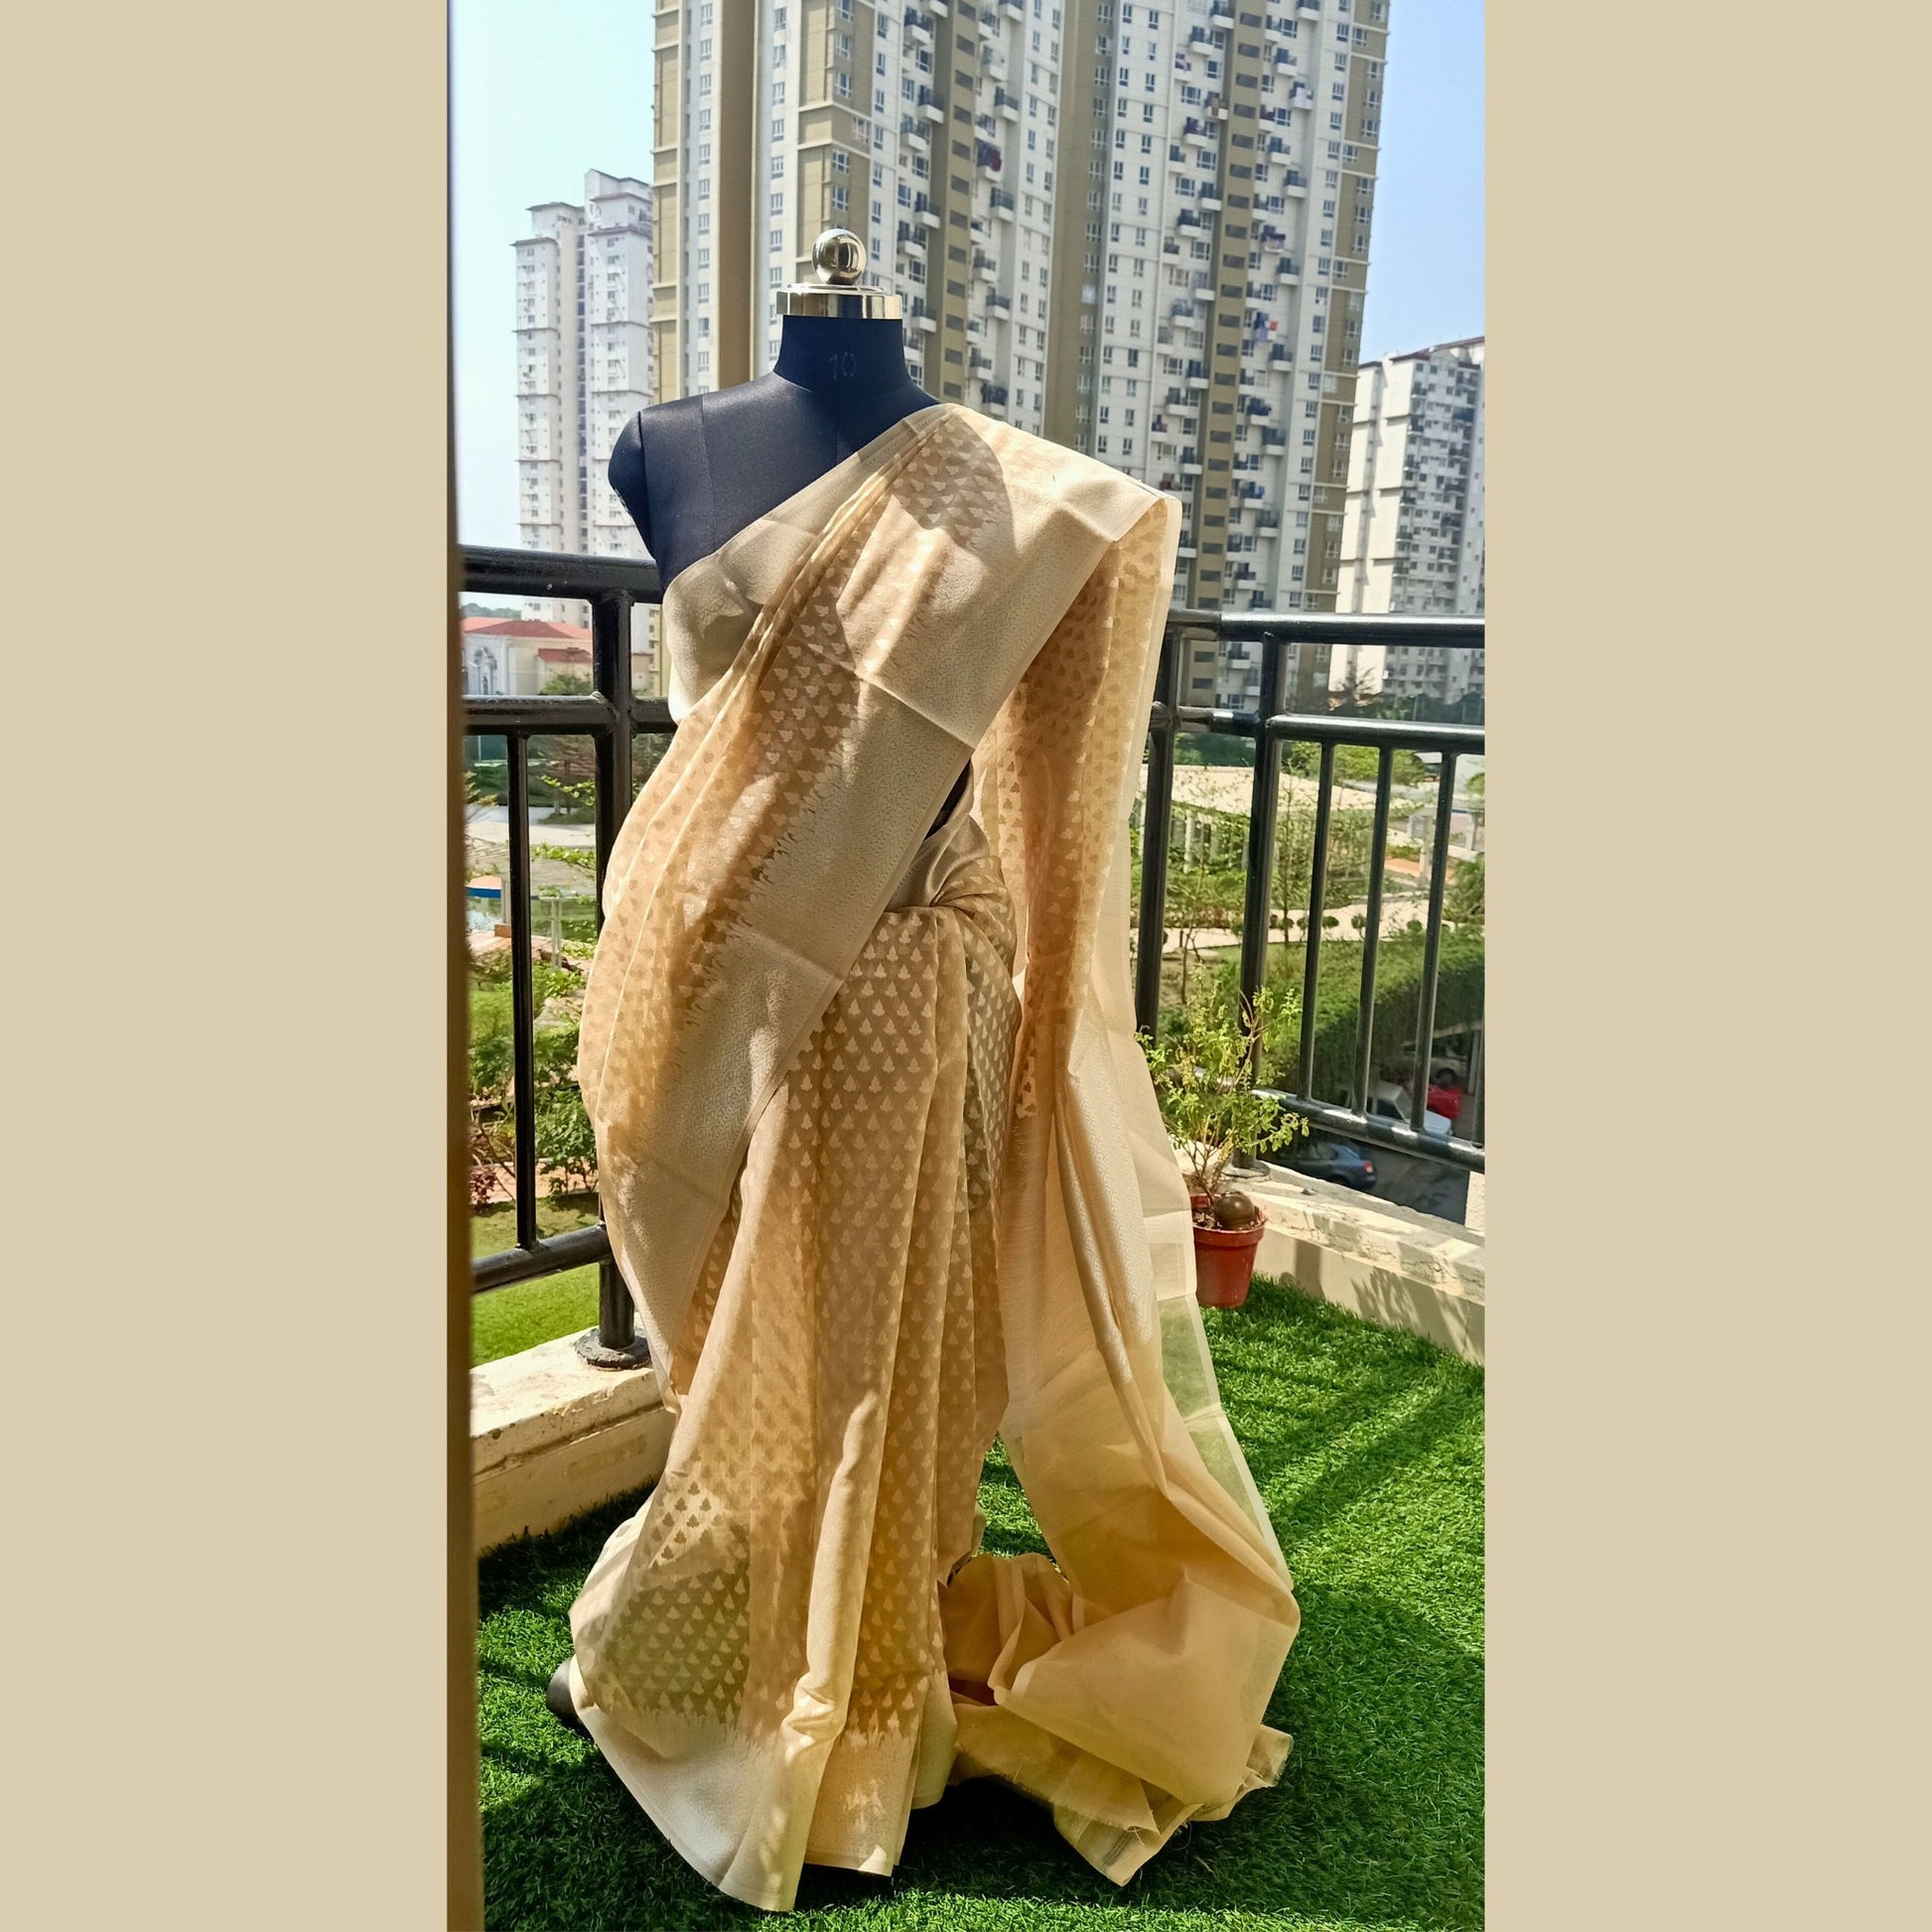 Benaras Soft Dhakai Saree in enchanting beige colour. Delicately adorned with intricate white boti detailing, this saree exudes timeless charm. Complete with a matching blouse piece, it's perfect for adding a touch of grace to any occasion - Fabcentra